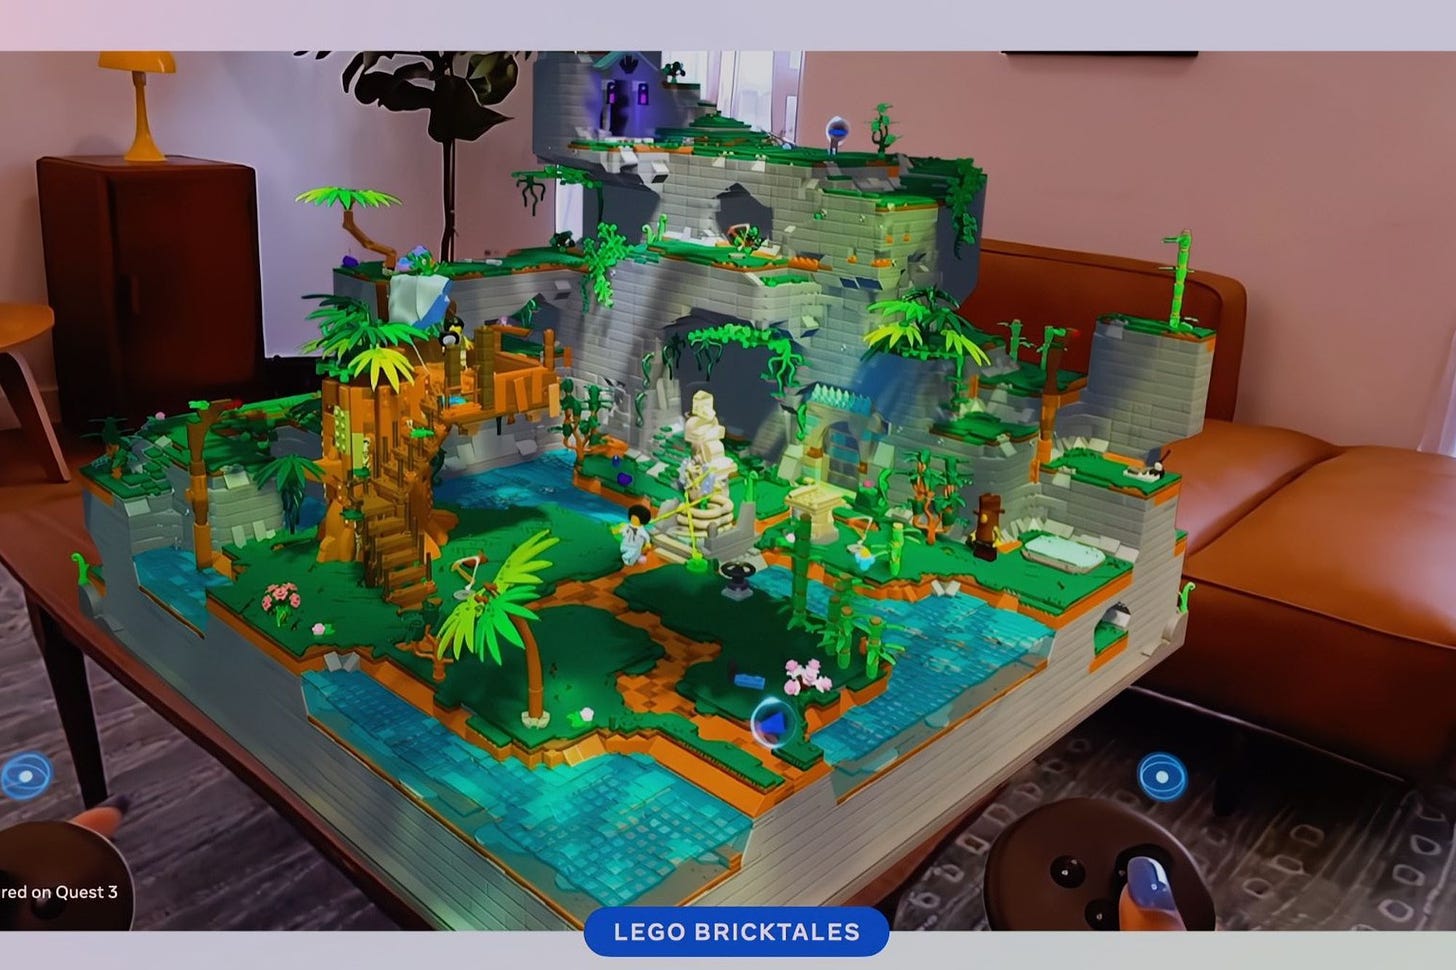 The Meta Quest 3 lets you play with virtual Legos in your real living room  - The Verge